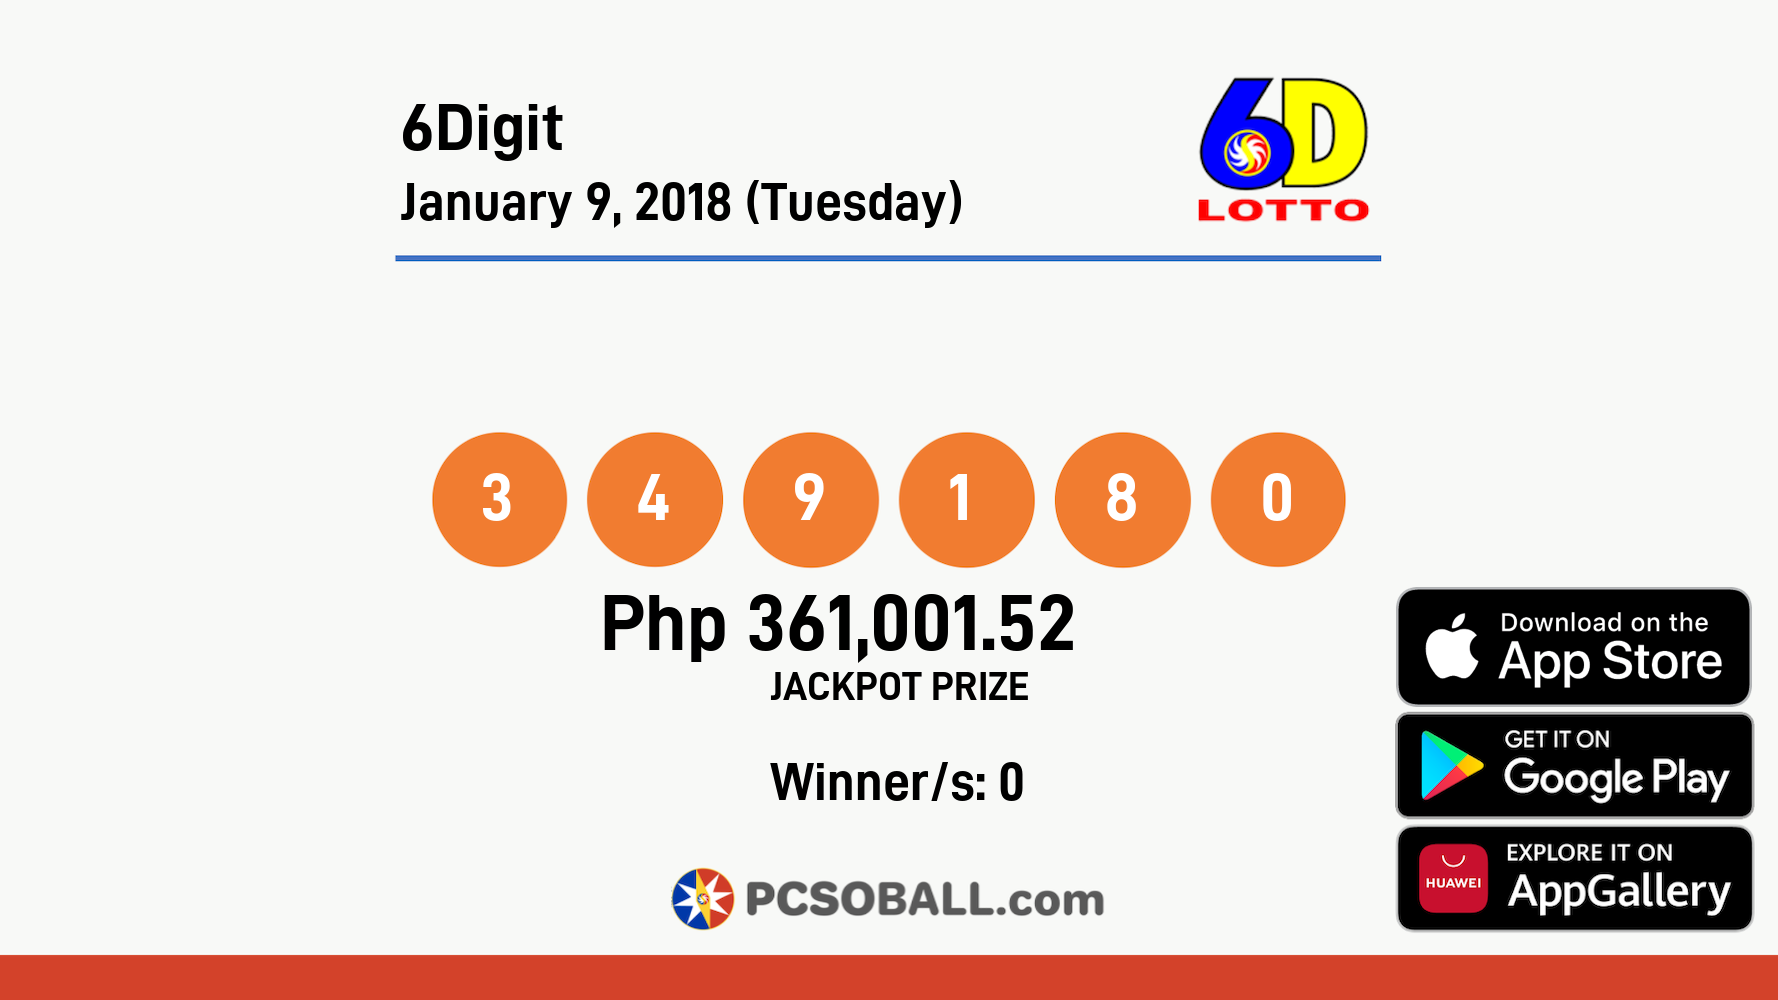 6Digit January 9, 2018 (Tuesday) Result